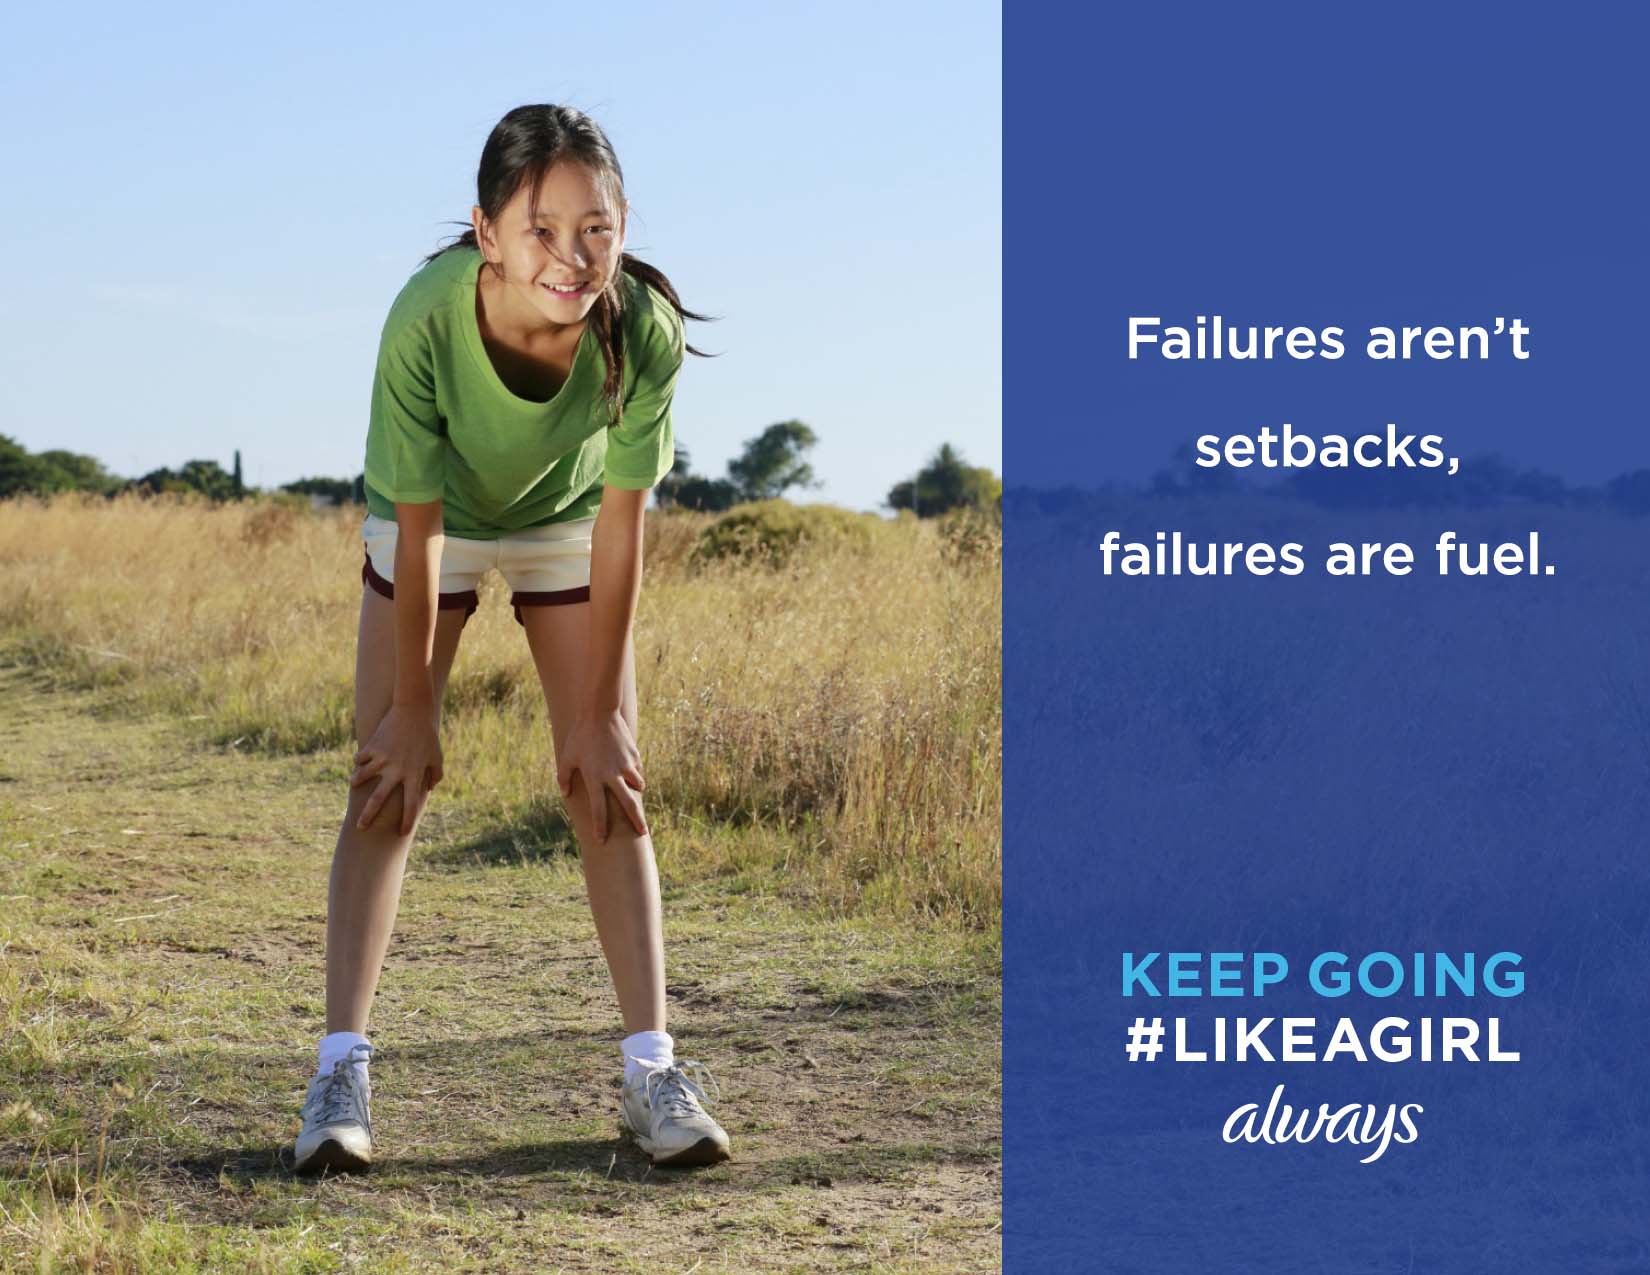 Always #LIKEAGIRL. Keeping going, keep going,keep going!. Girl where are going. Failure during